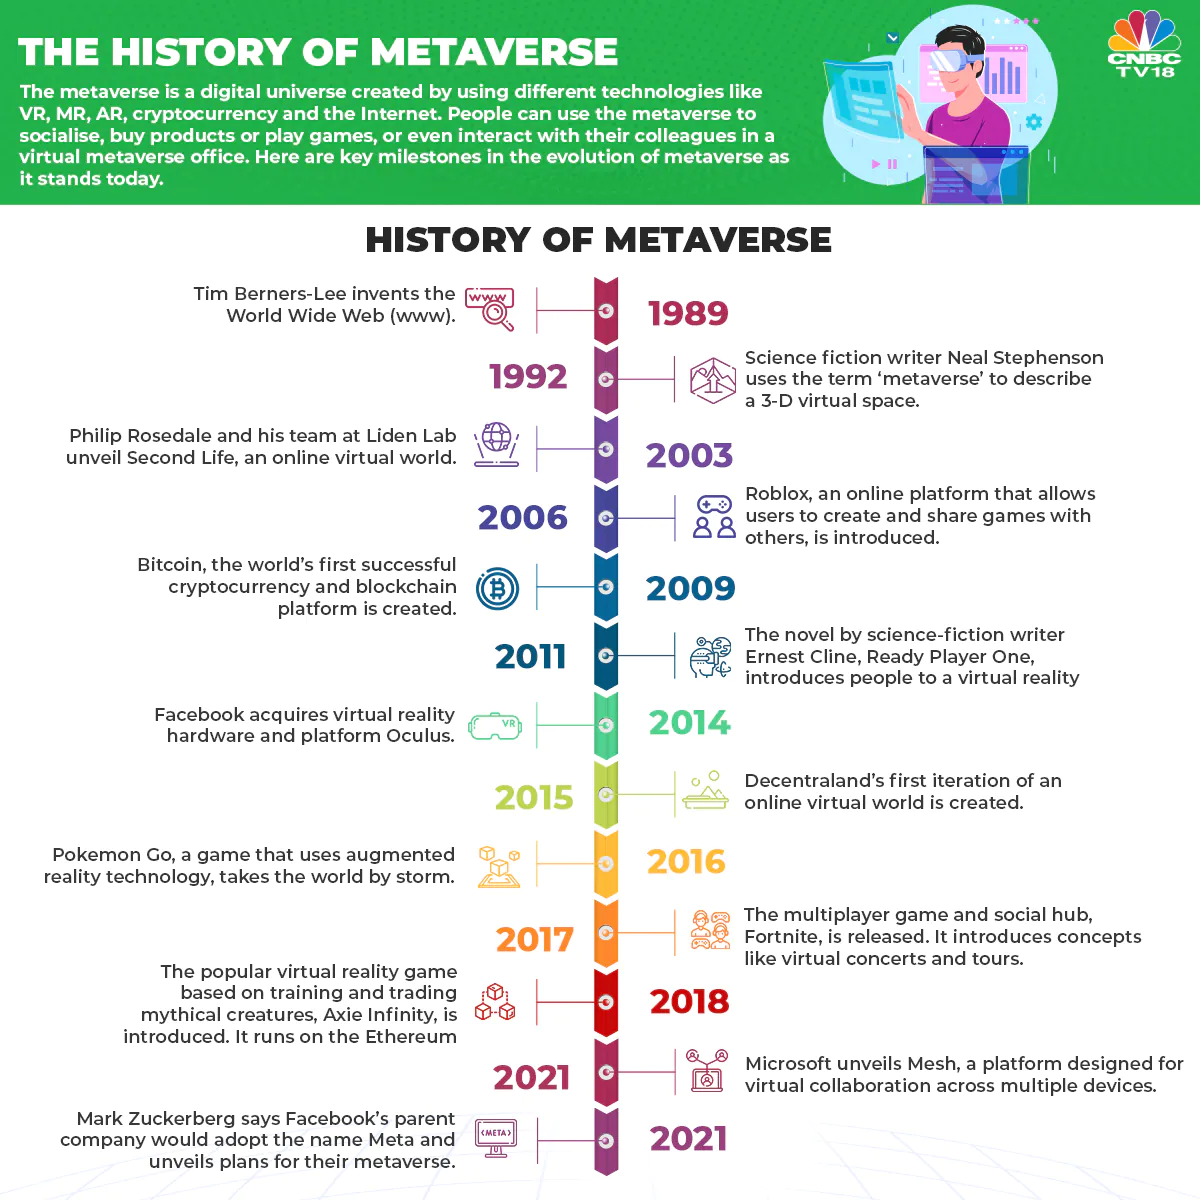 The Metaverse Guide – The Evolution of The Internet, Medium